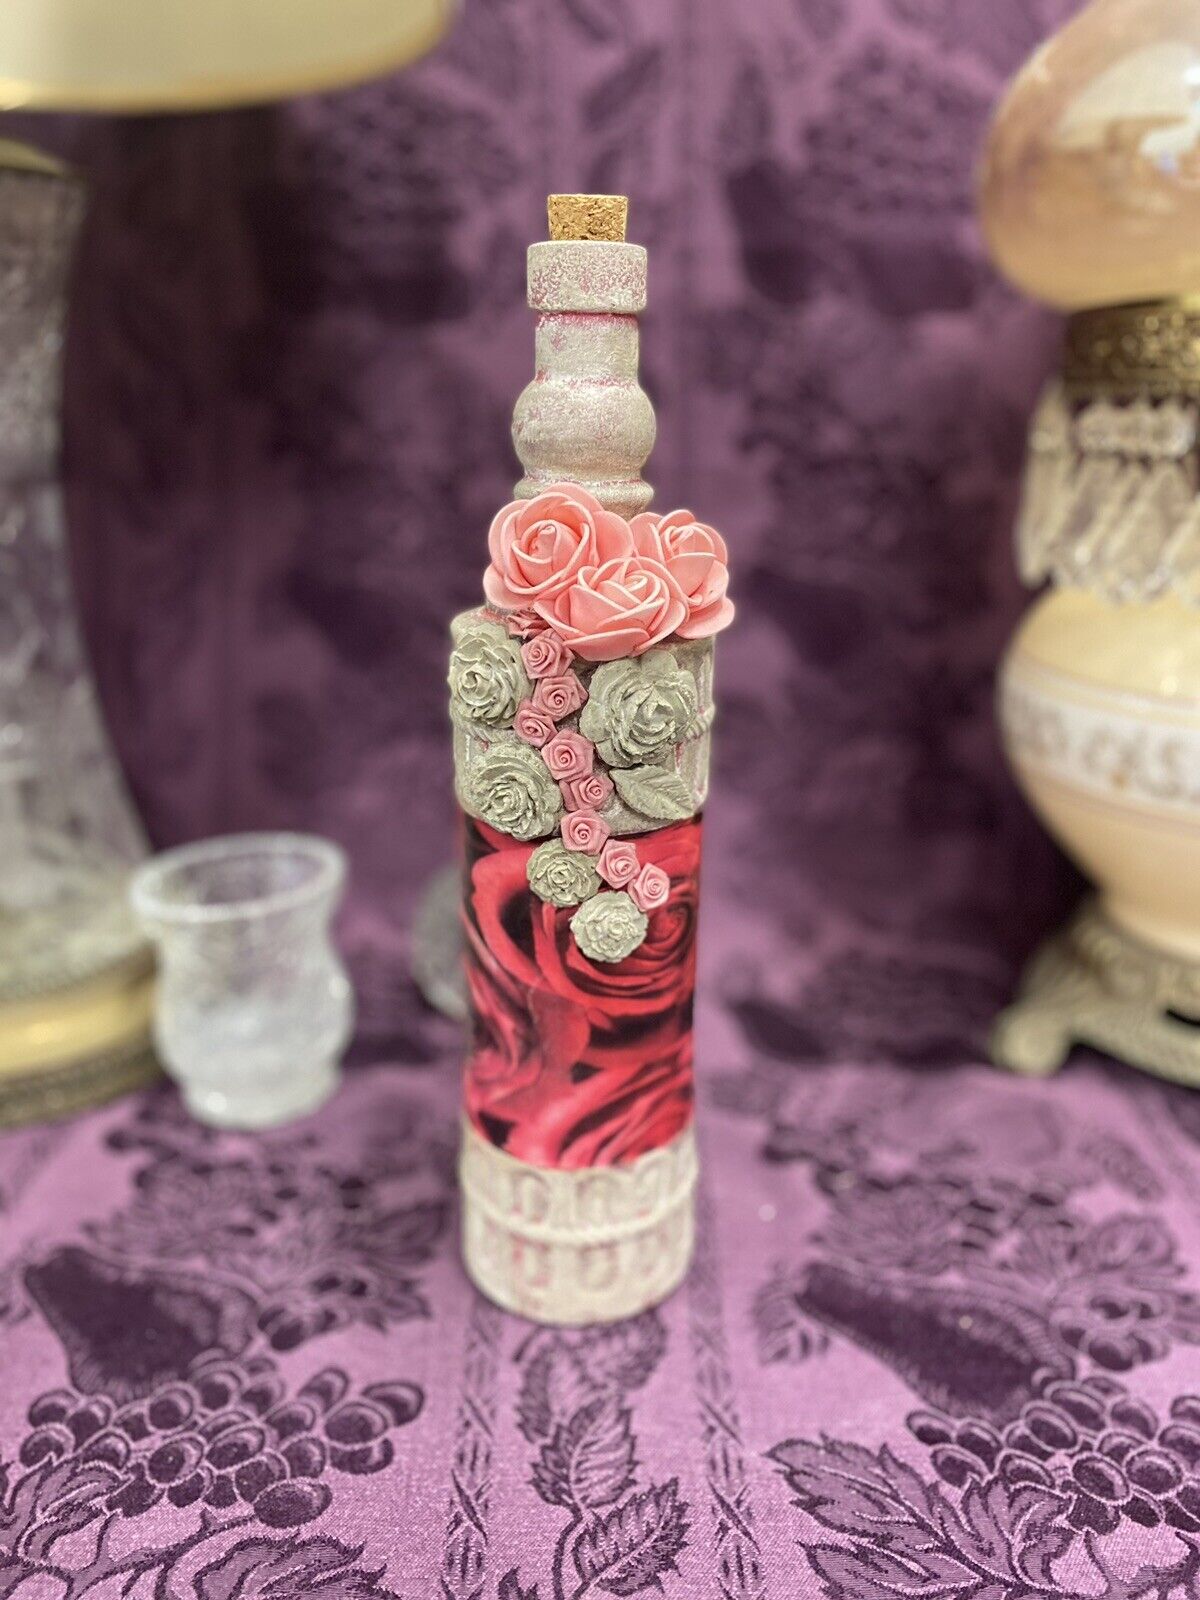 Decorative Wine Bottle Stained Glass Hand Painted Upcycled Pink Roses Decorative Bottle Stylin' Spirit   